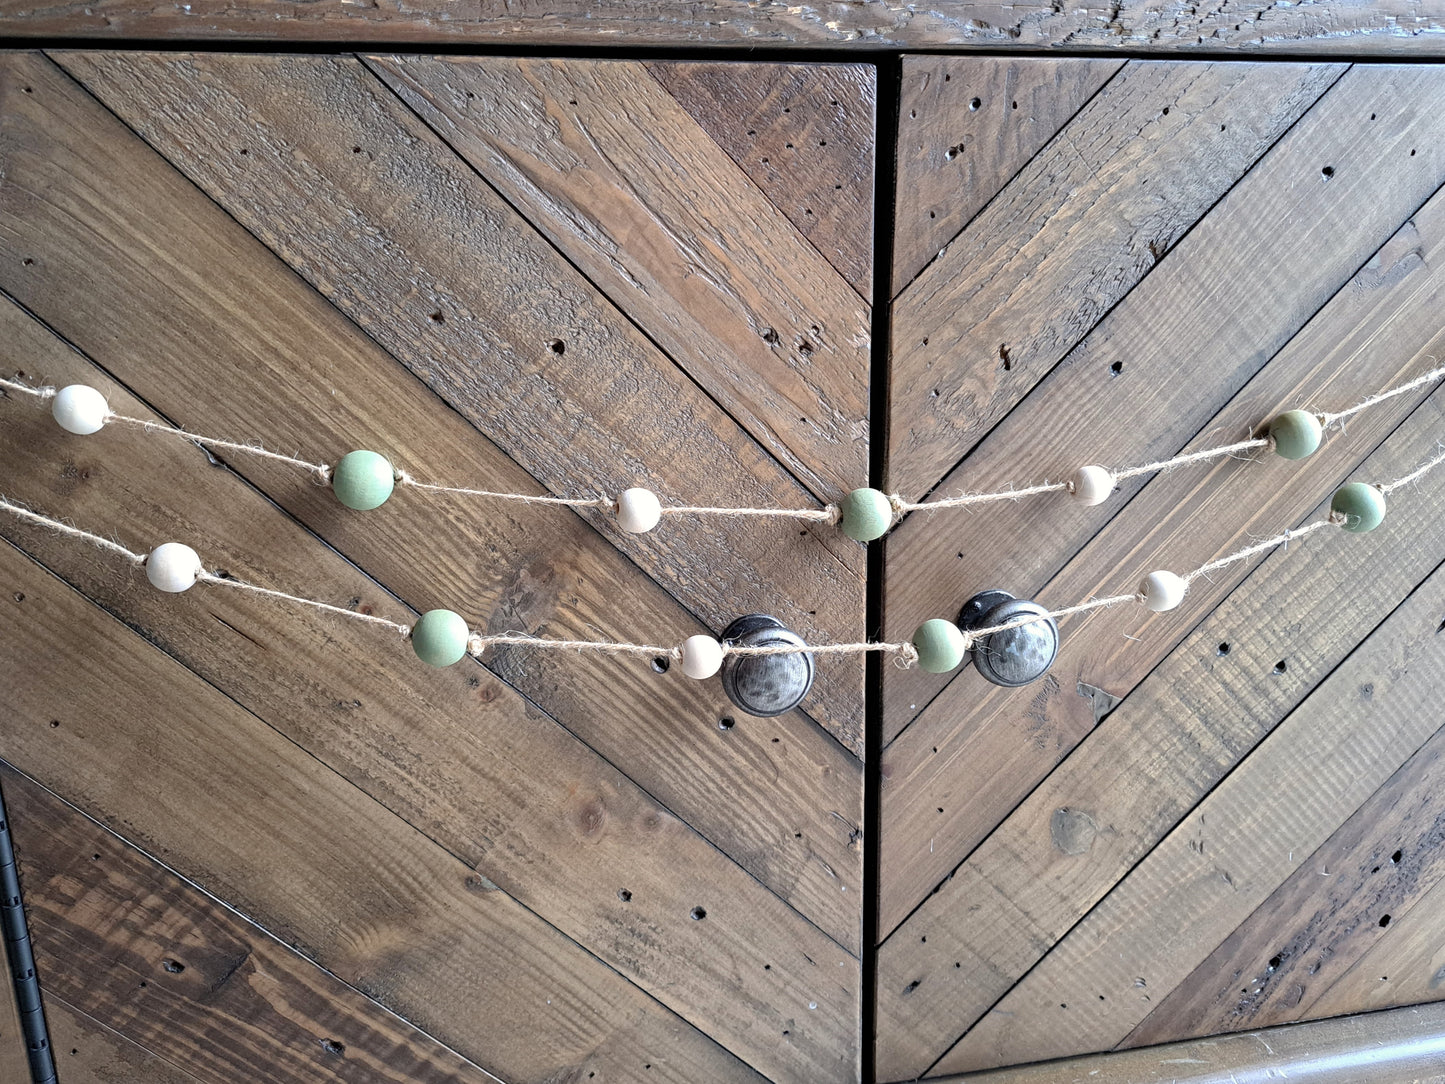 Weathered Landing's handmade sage green and natural wood bead garland. Beautiful in a nursery or on a fireplace mantel for a Scandi, boho, or modern farmhouse feel. Works great with neutral decor and is made with wood and jute. Find wooden bead garlands at Weathered Landing. Located in Komoka, Ontario. Shipping to Canada and US.